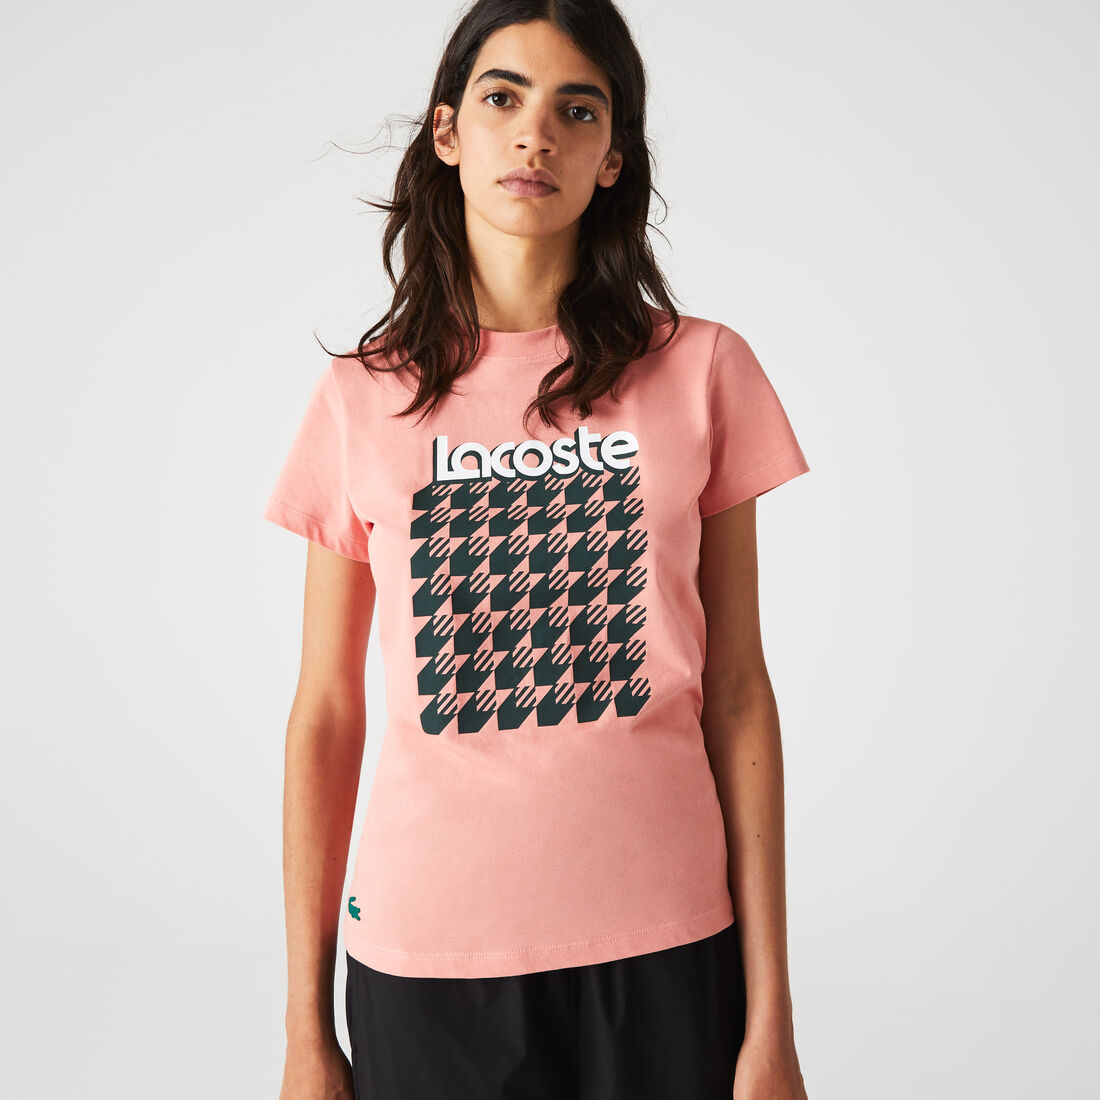 Women's Lacoste SPORT Breathable Houndstooth Patterned T-shirt